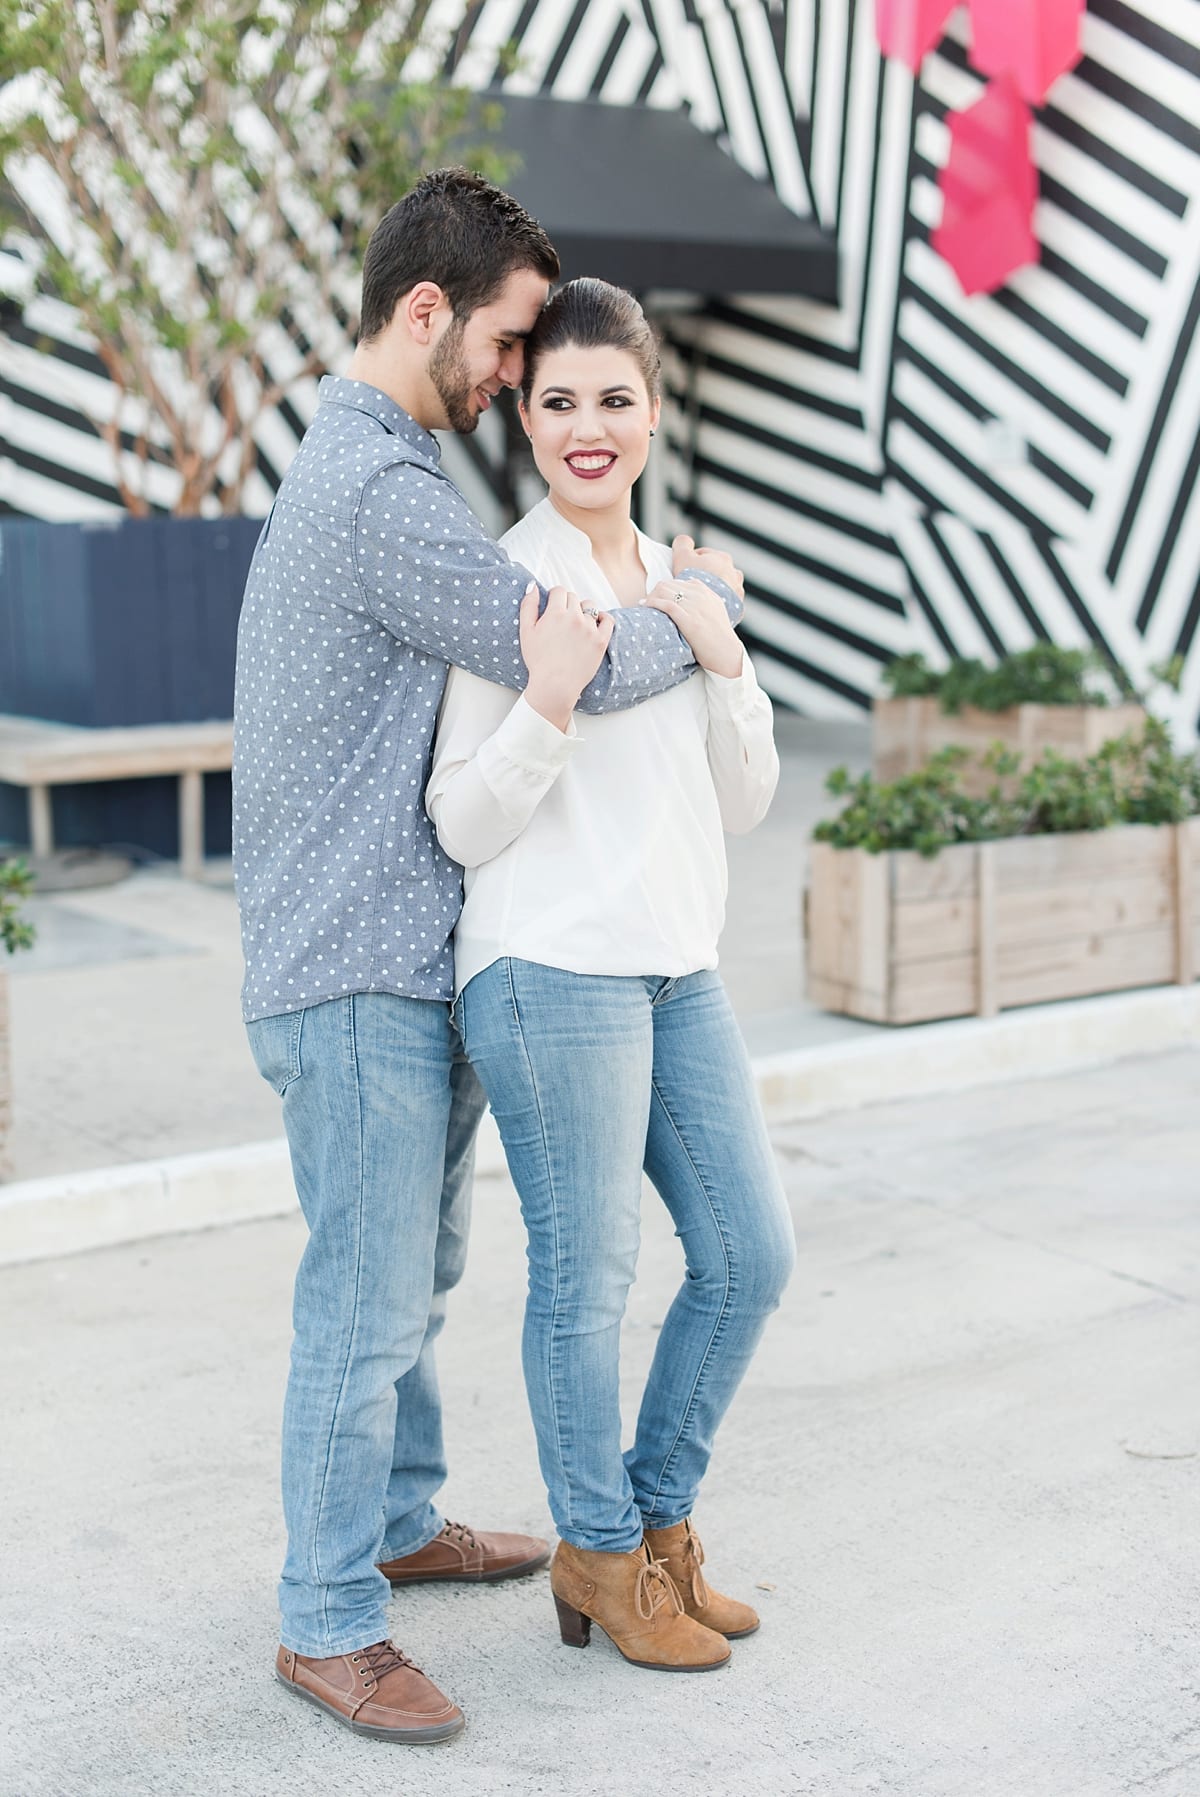 Wynwood-Walls-Engagement-Pictures_0444